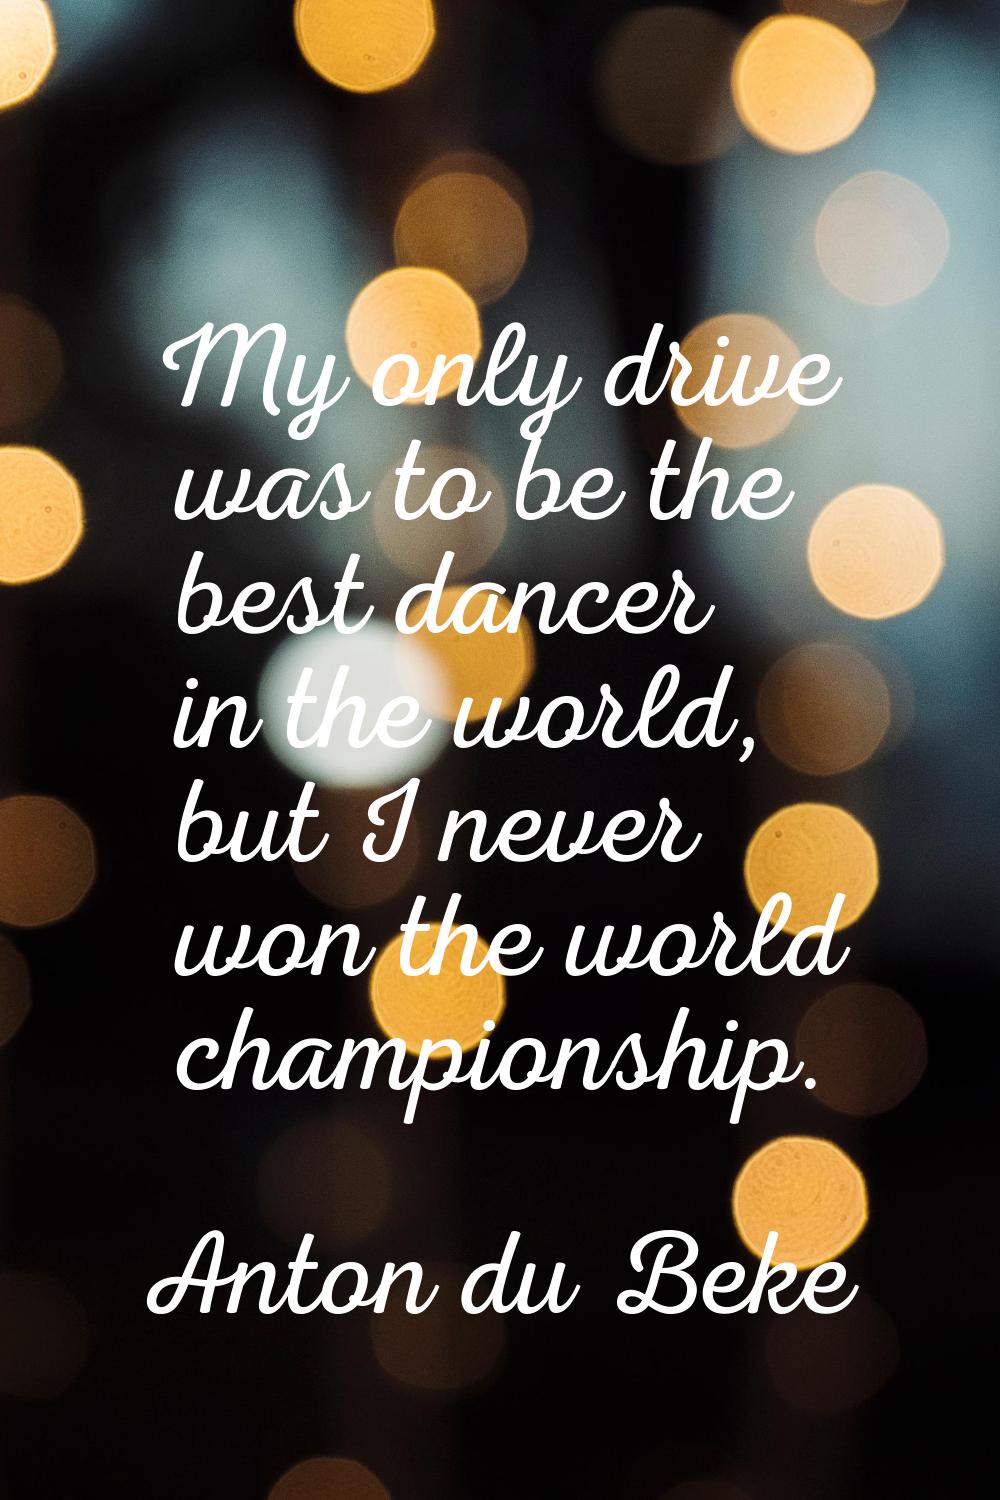 My only drive was to be the best dancer in the world, but I never won the world championship.